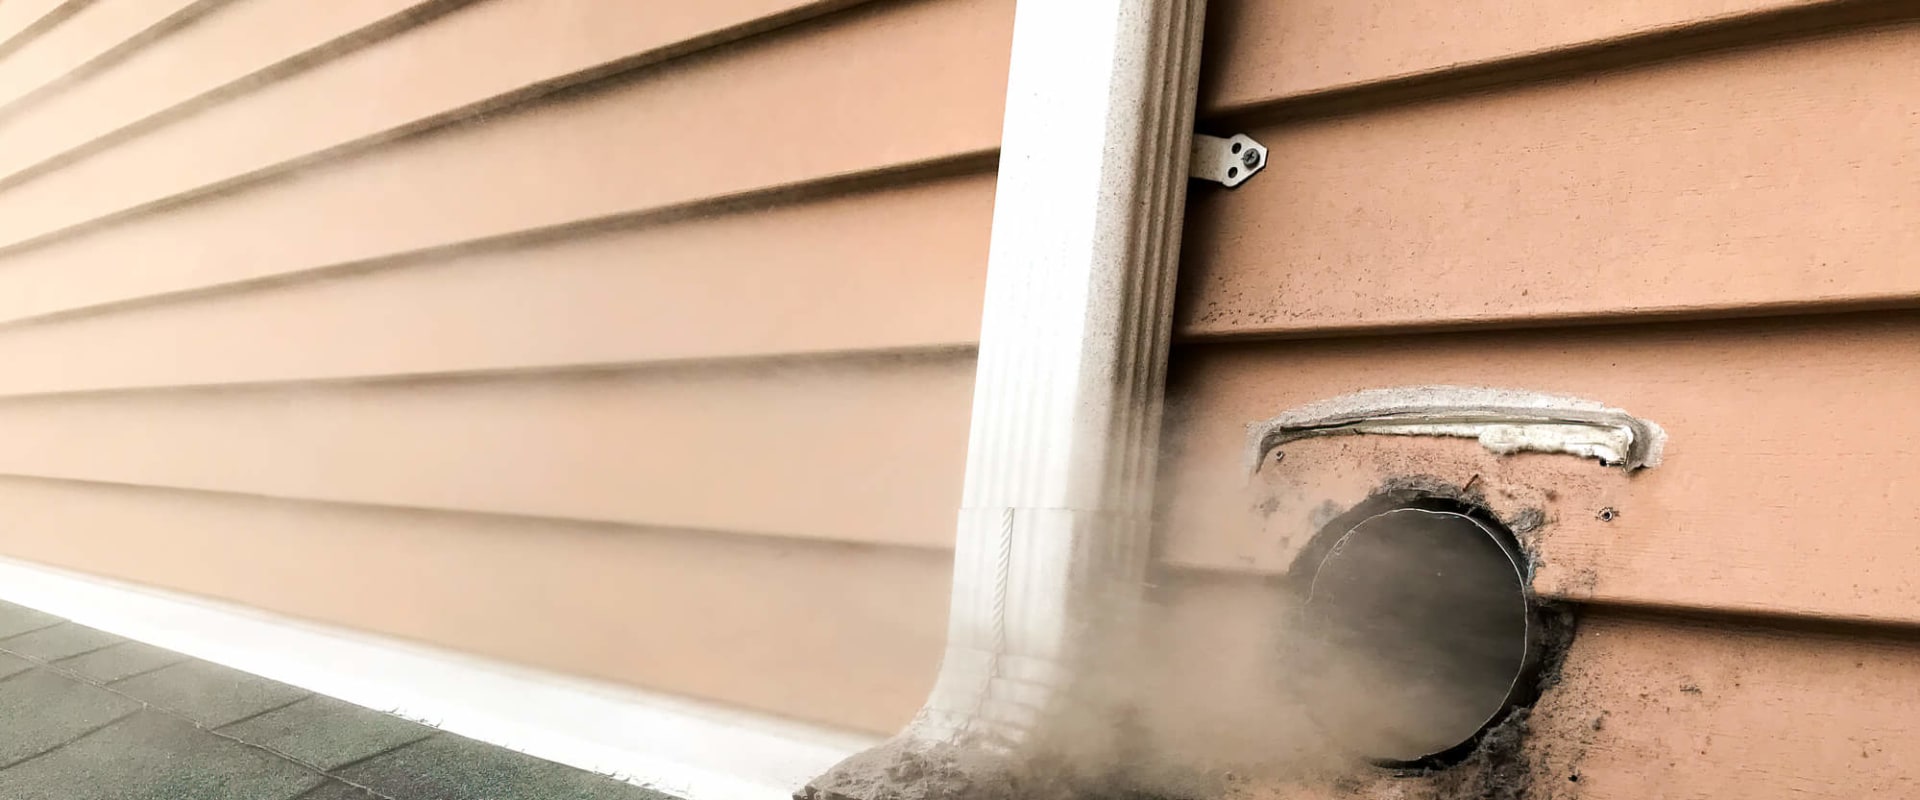 Importance of Vent Cleaning Services in Delray Beach FL